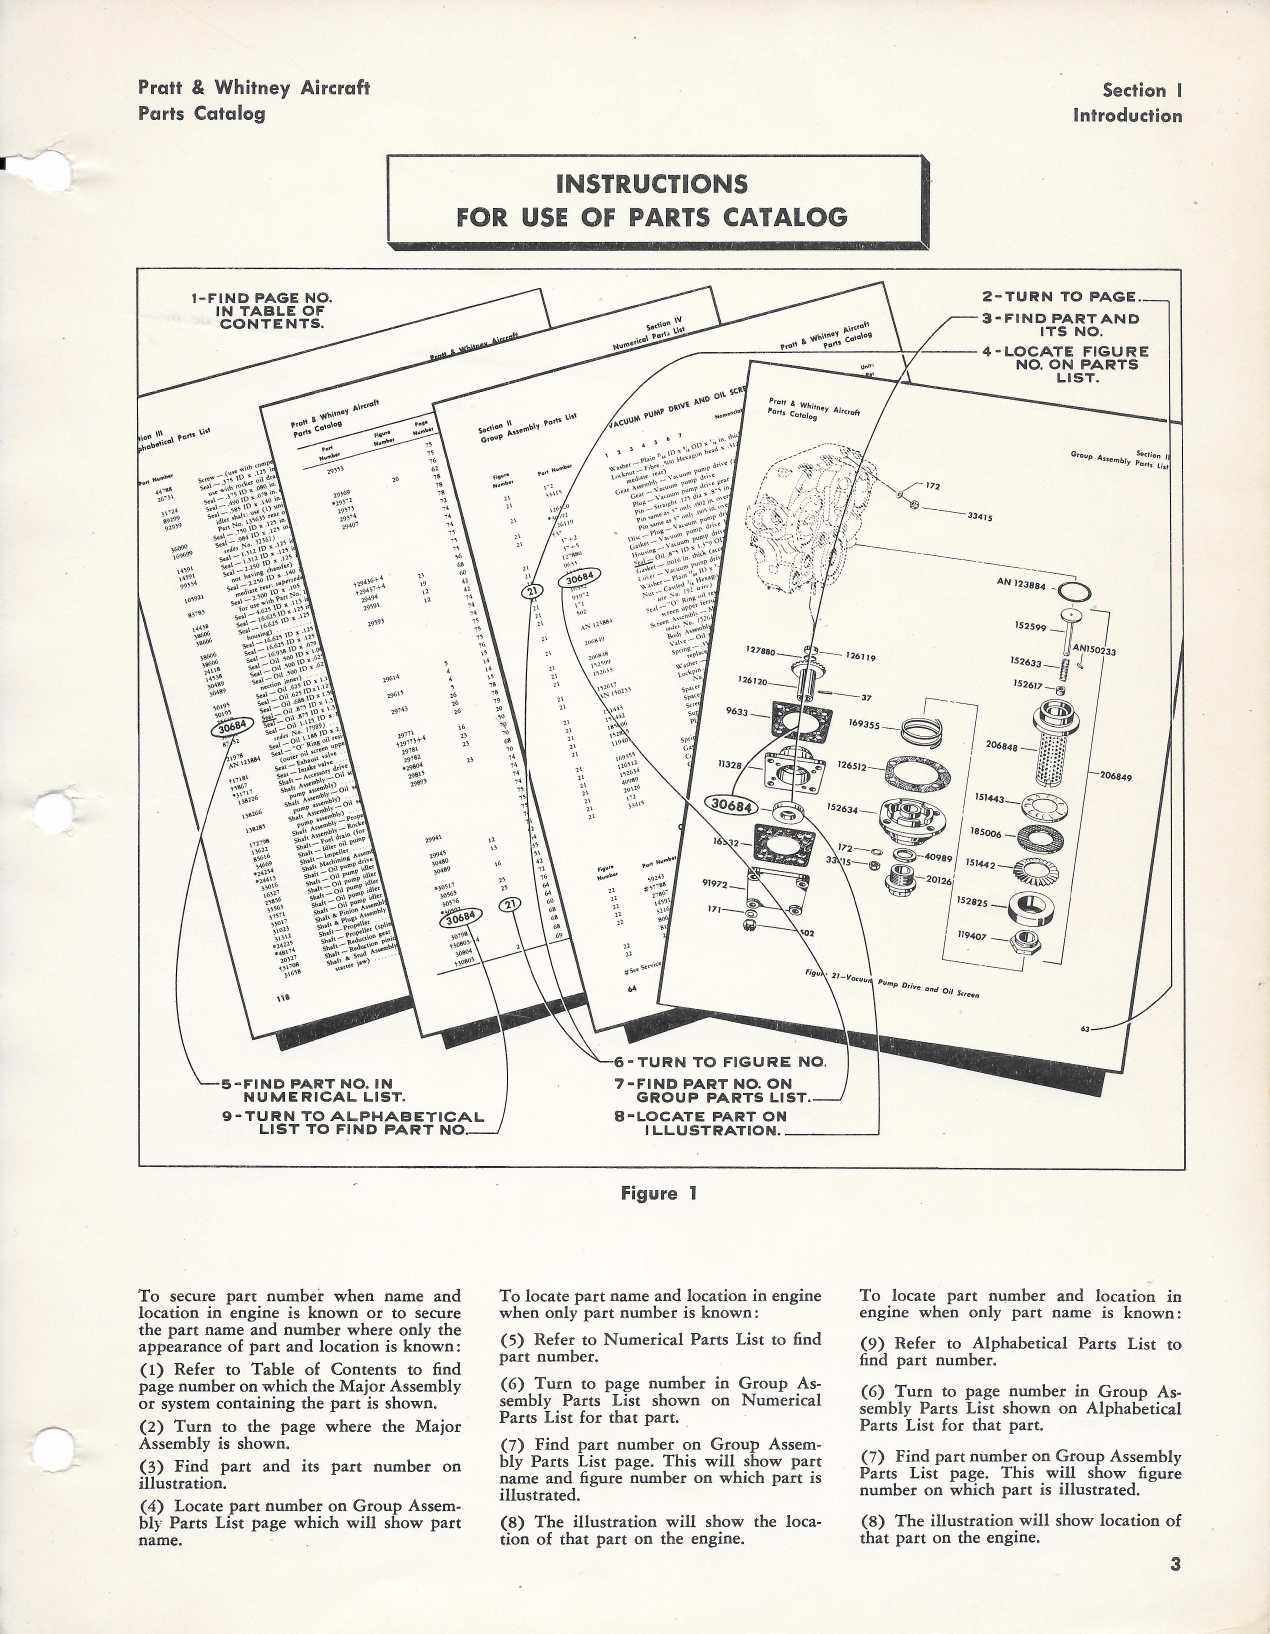 Sample page 5 from AirCorps Library document: Parts Catalog for Twin Wasp R-1830 - S1C3G